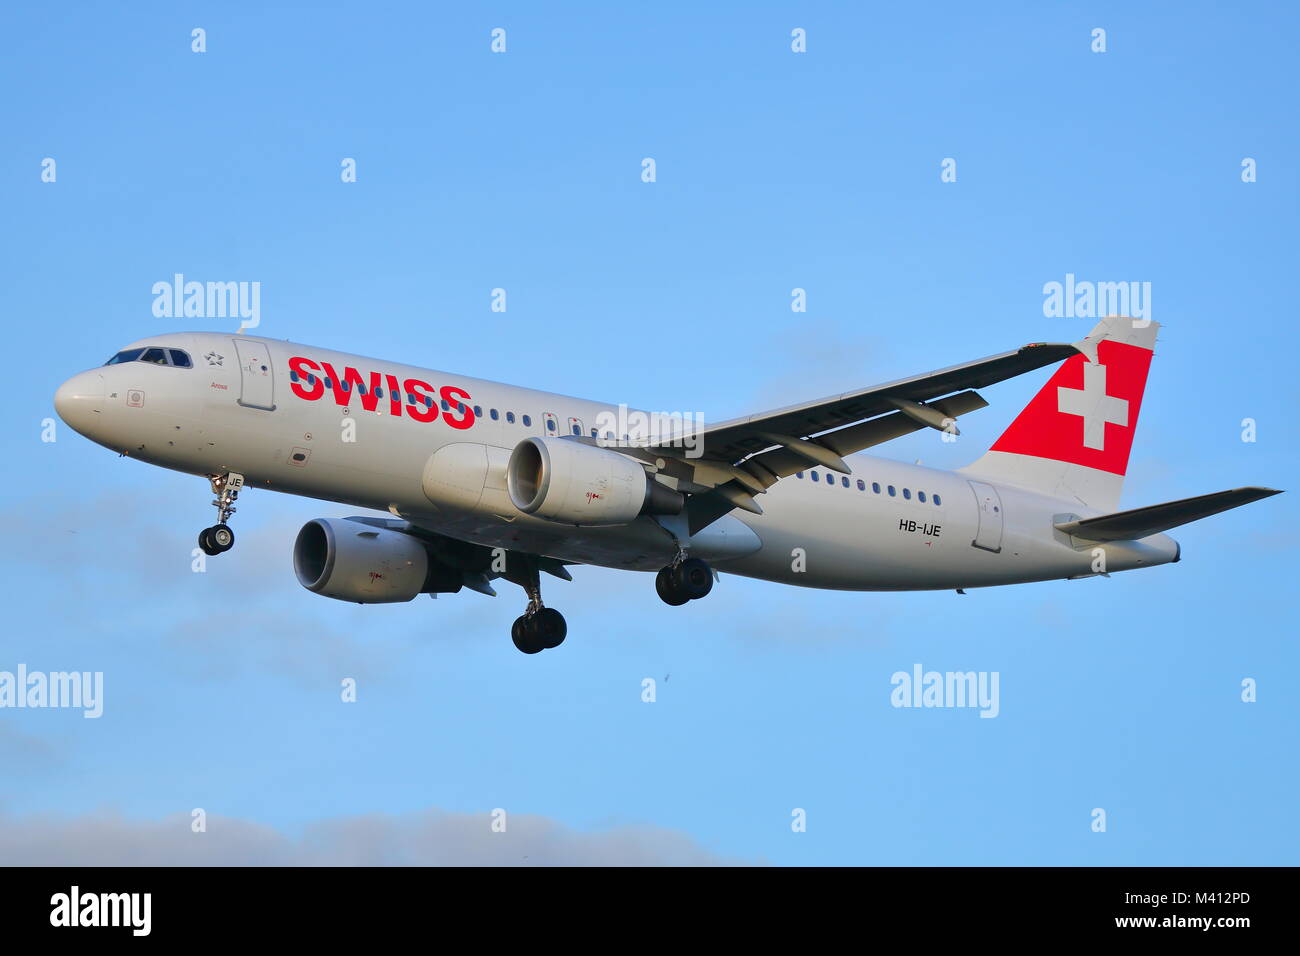 Swiss International Airlines Airbus A320 HB-IJE landing at London Heathrow Airport, UK Stock Photo